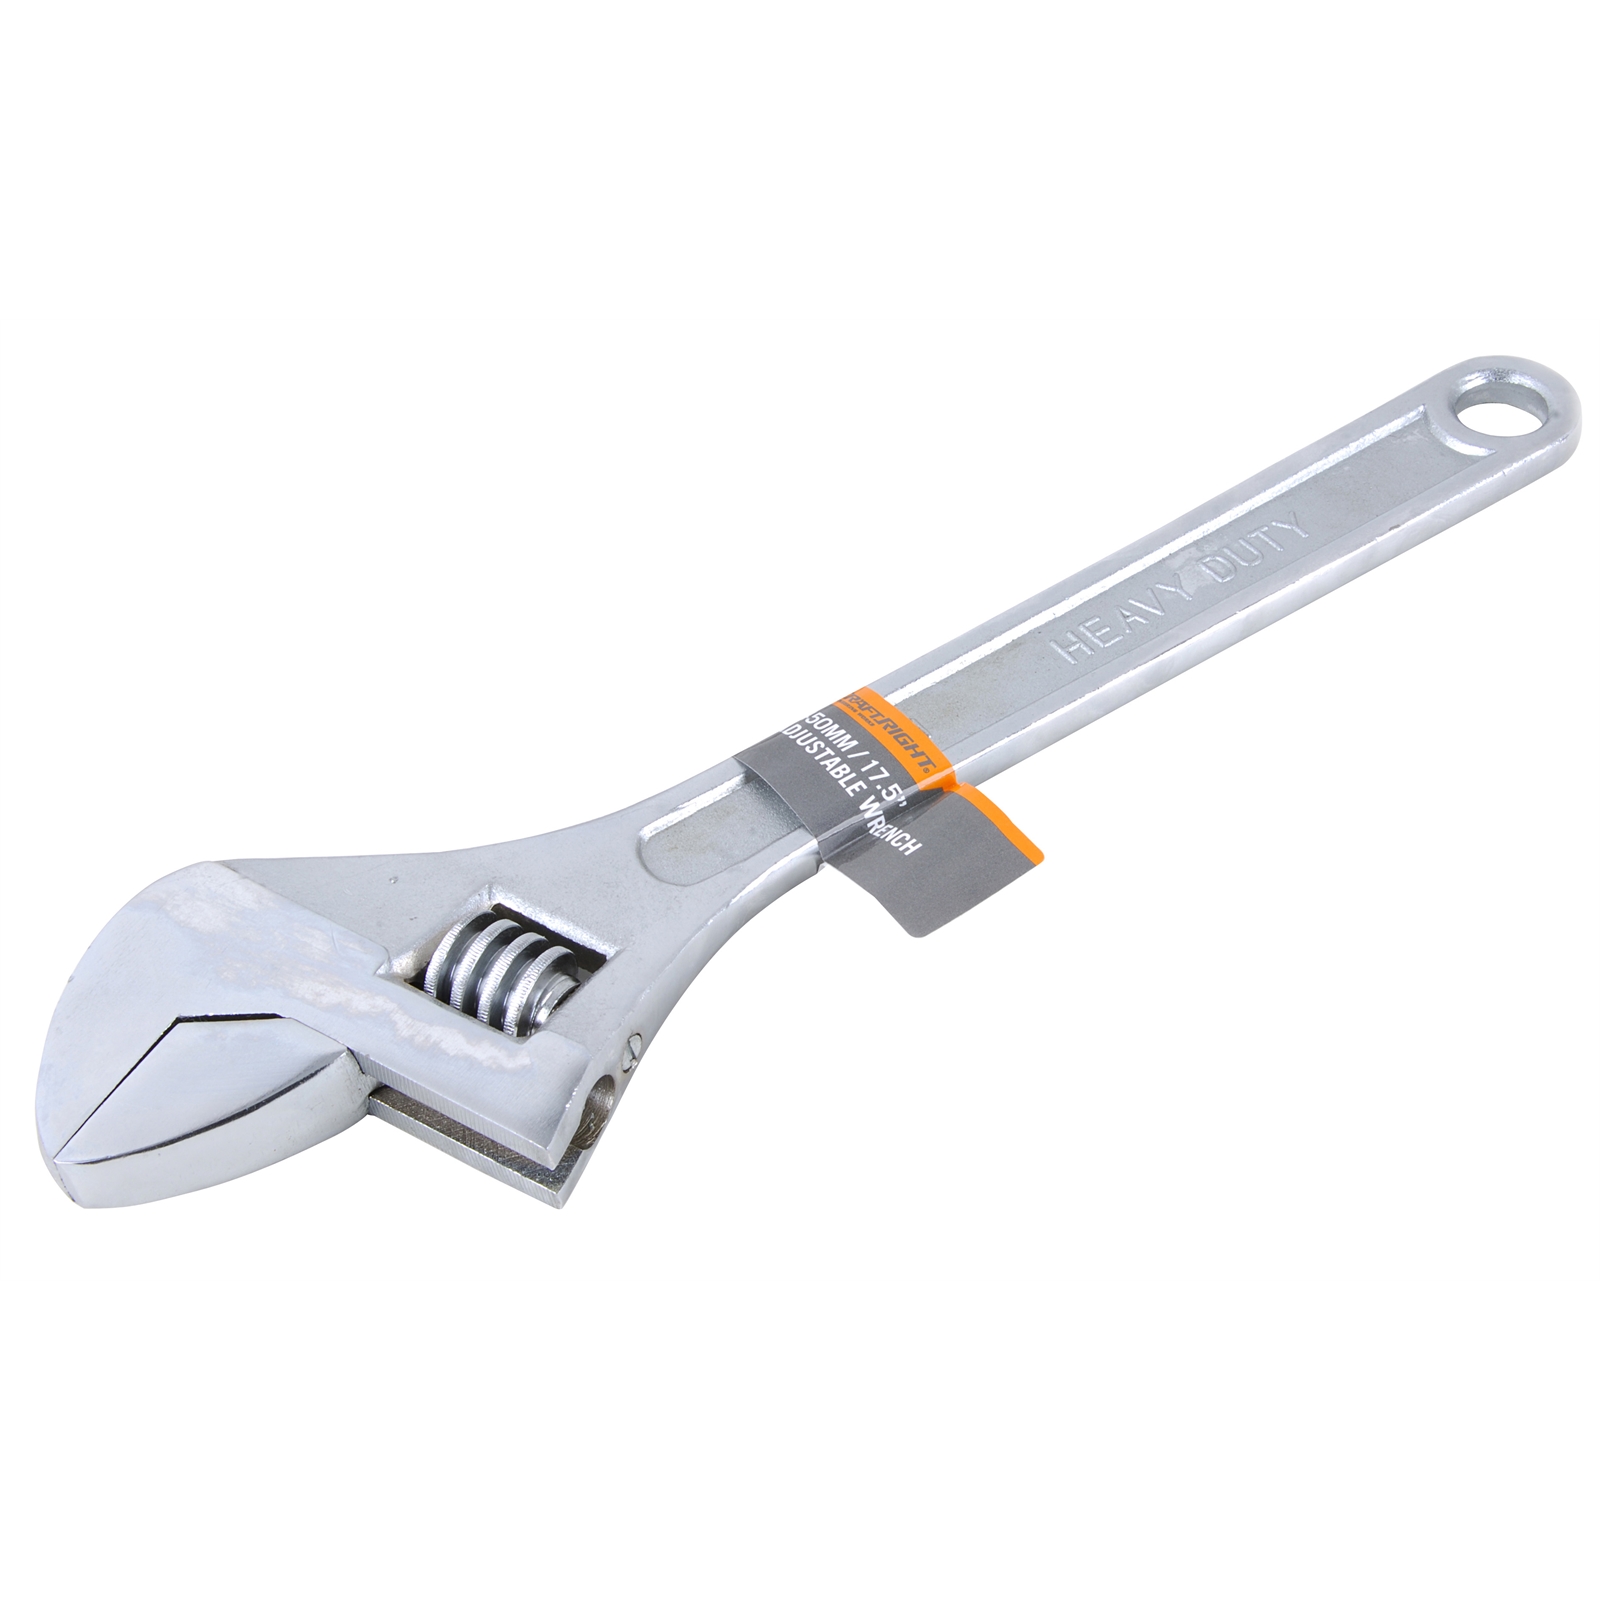 Craftright 450mm Adjustable Wrench